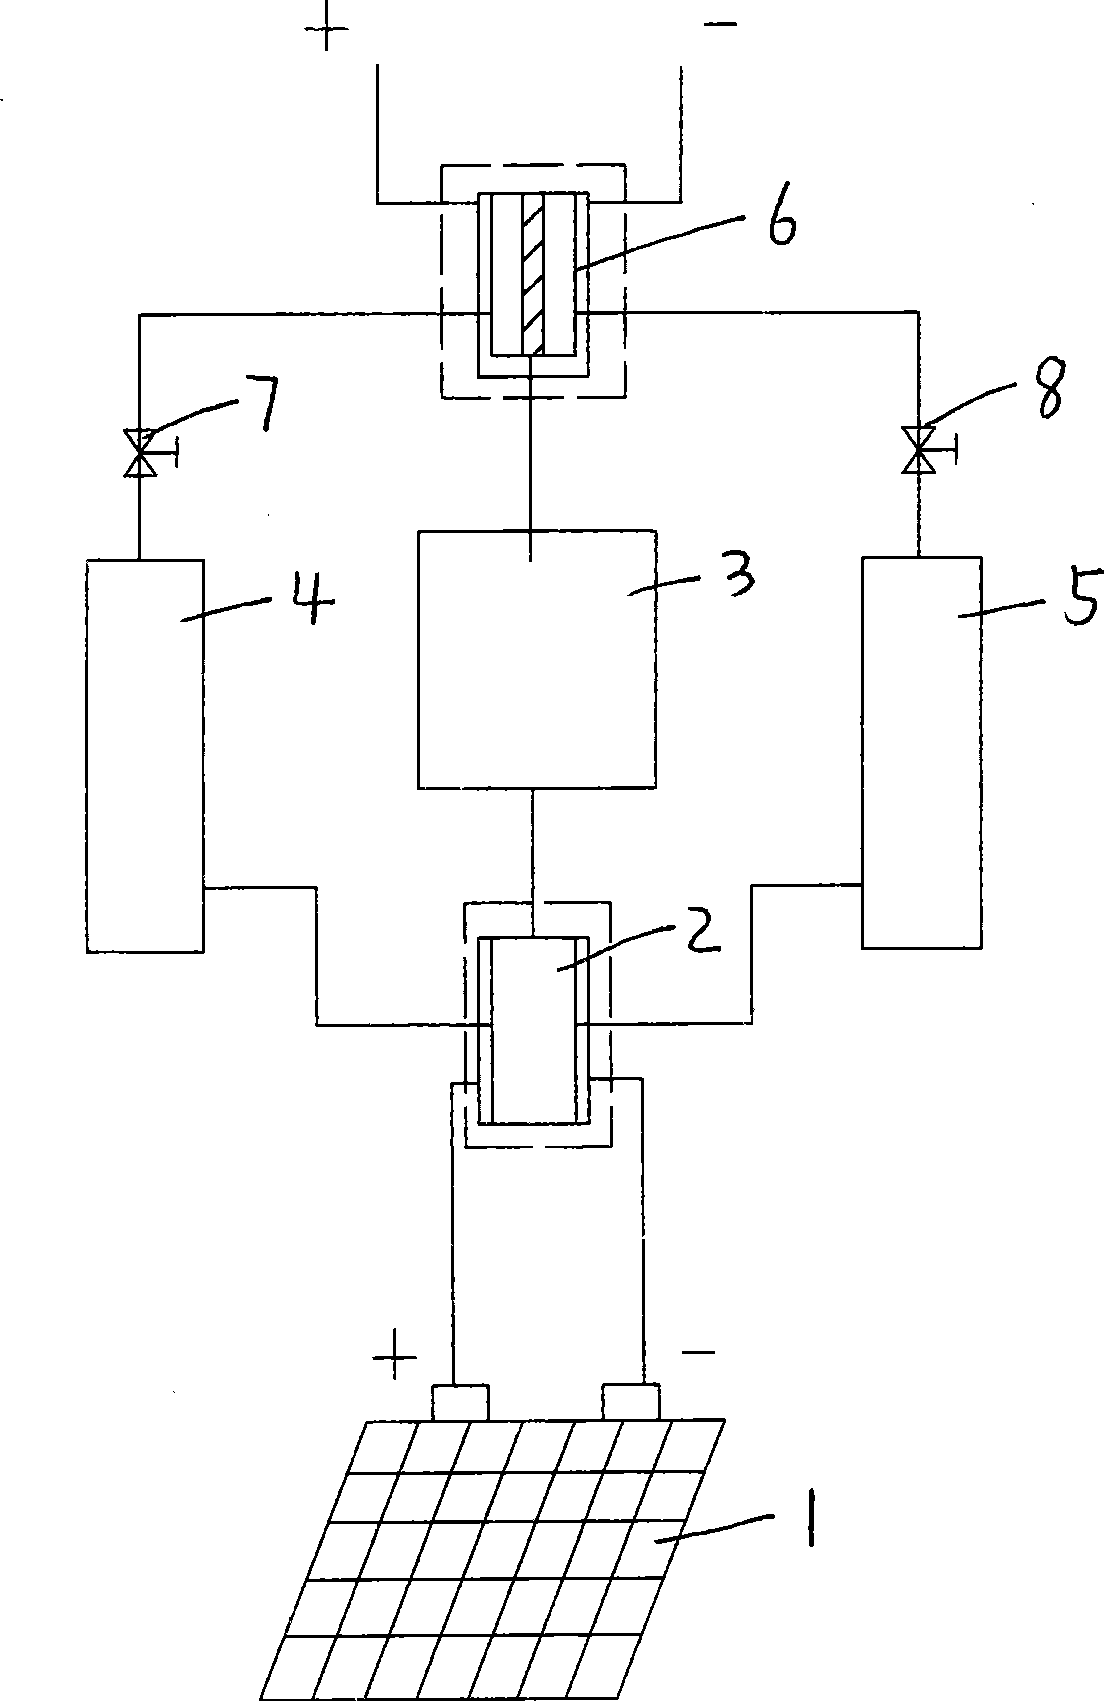 Solar photovoltaic water energy storing device